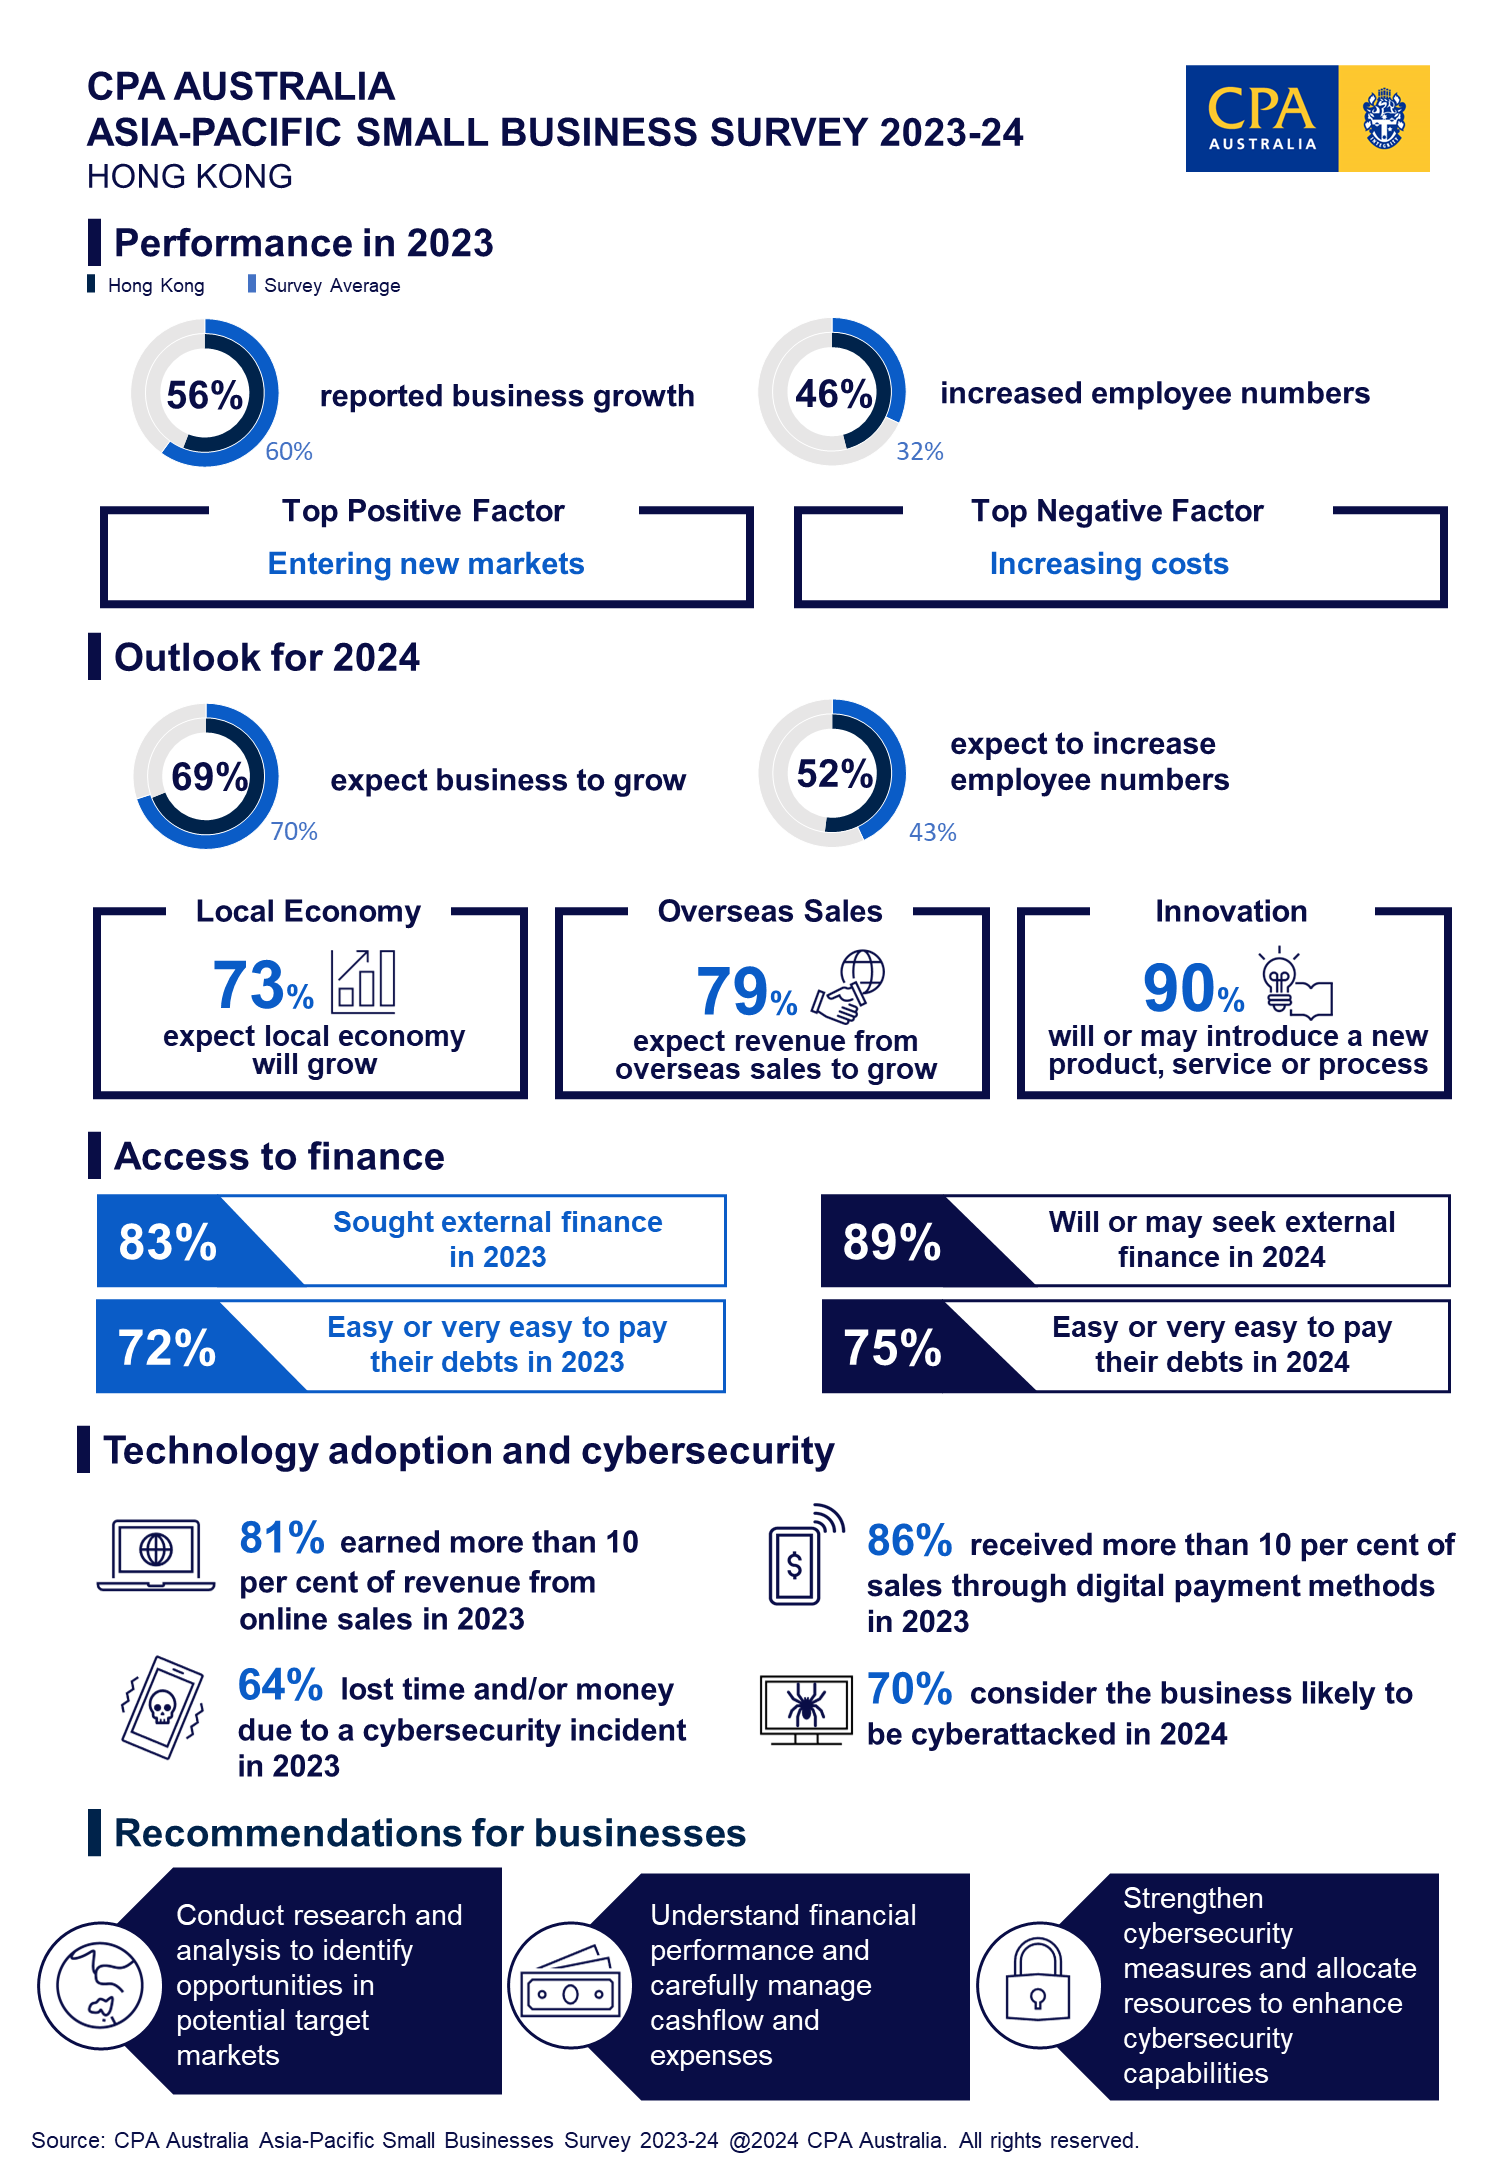 CPA Australia Asia-Pacific Small Business Survey 2023-24 Hong Kong Results Infographic